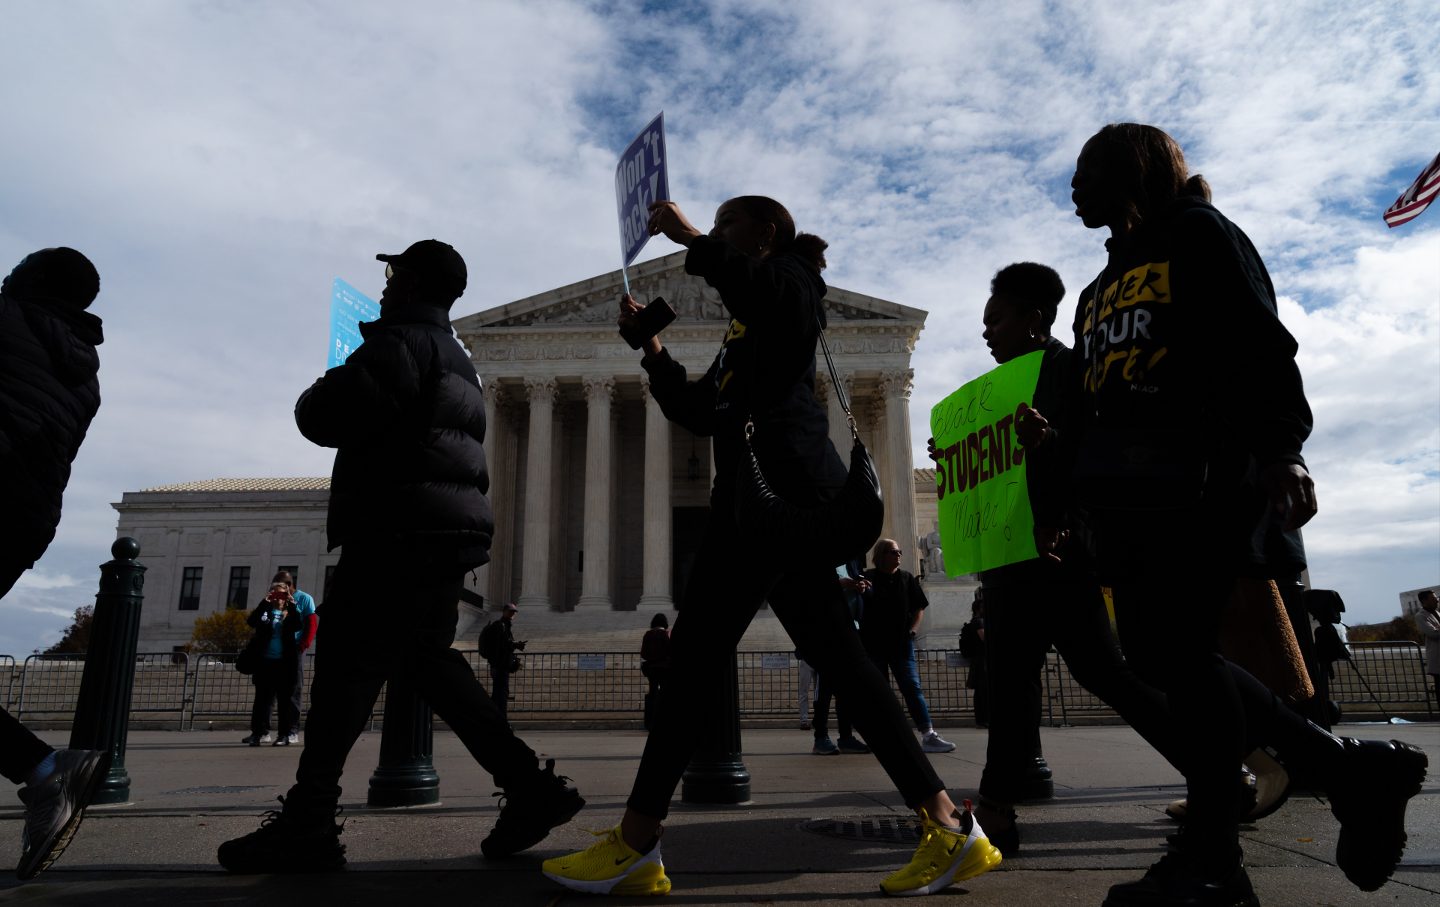 Supporters of affirmative action rally outside the Supreme Court in Washington, D.C., on October 31, 2022.